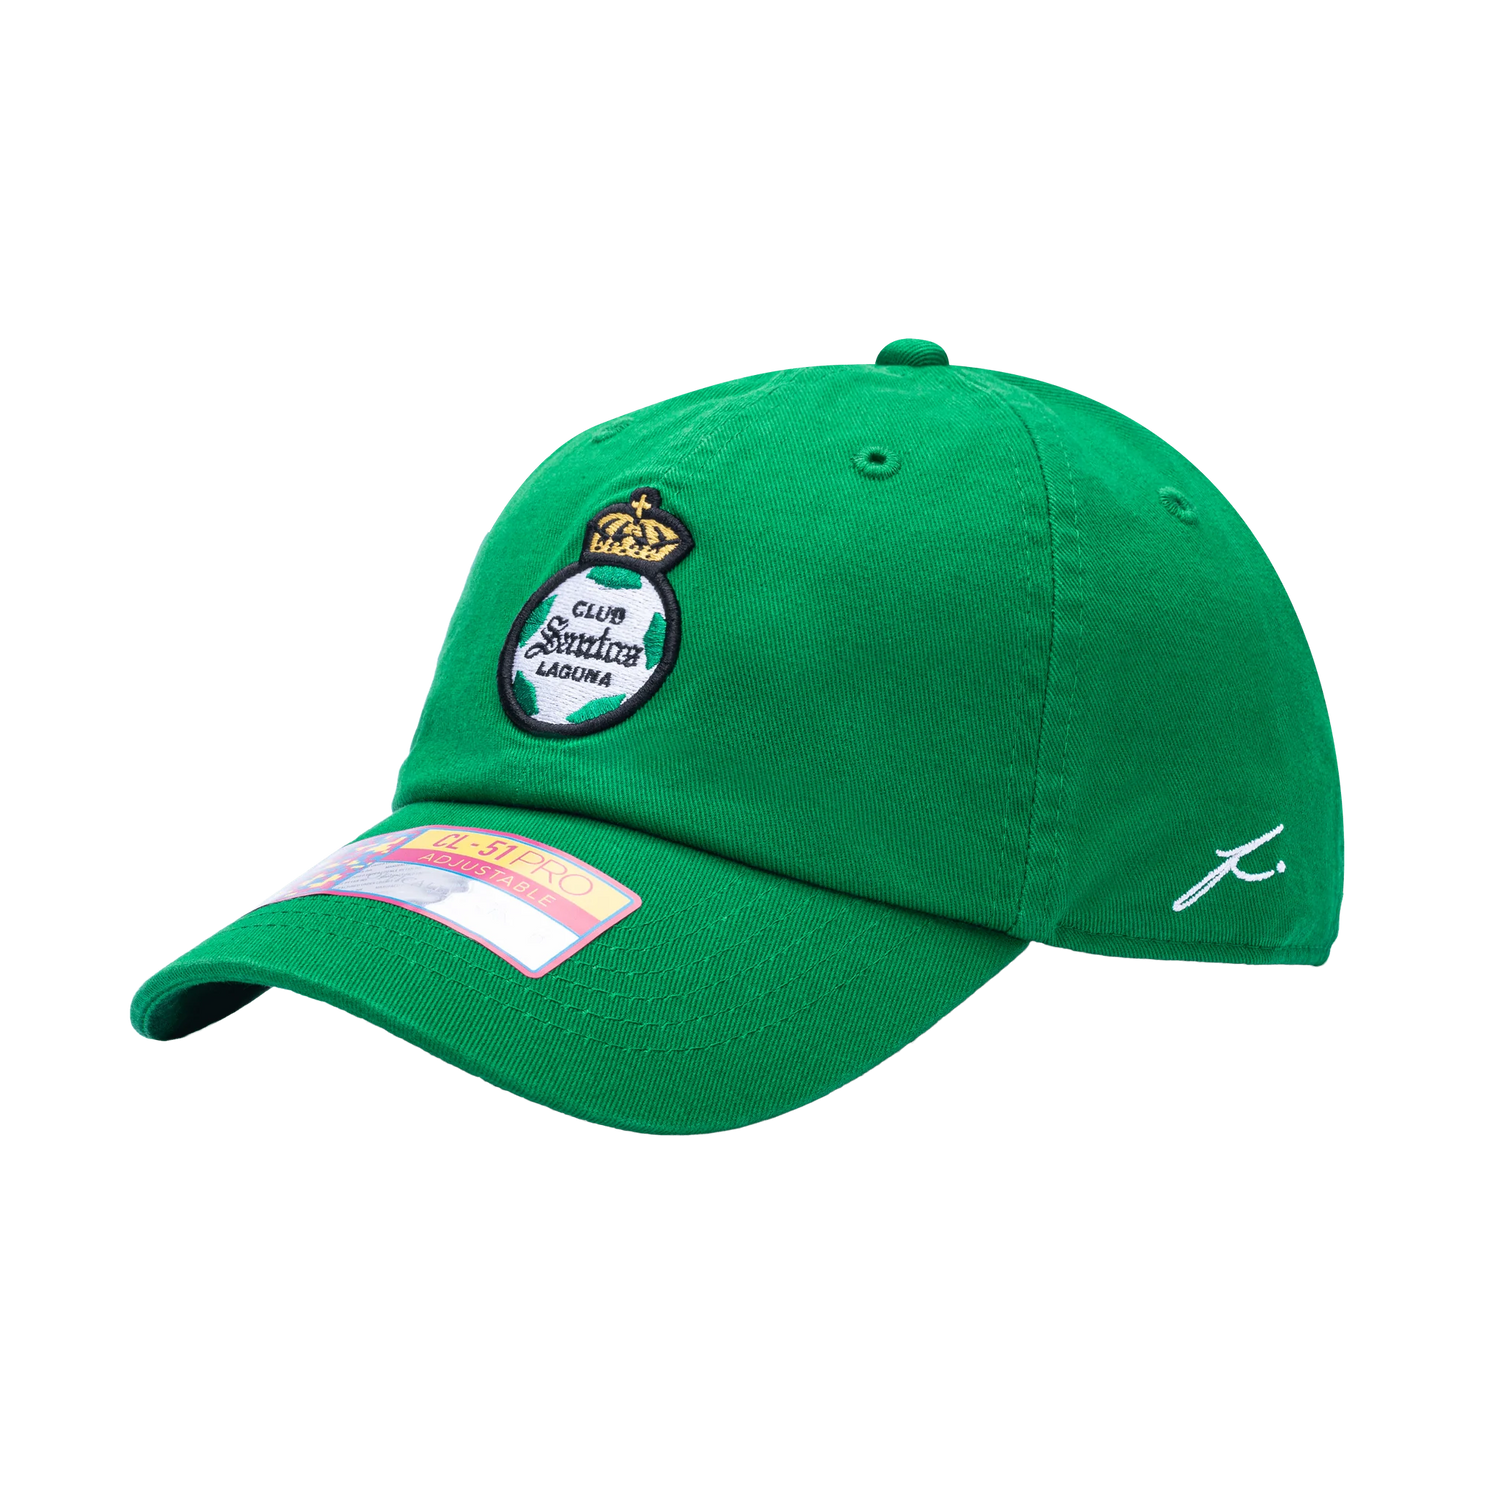 FI Collection Club Santos Bambo Classic Hat (Lateral - Side 1)